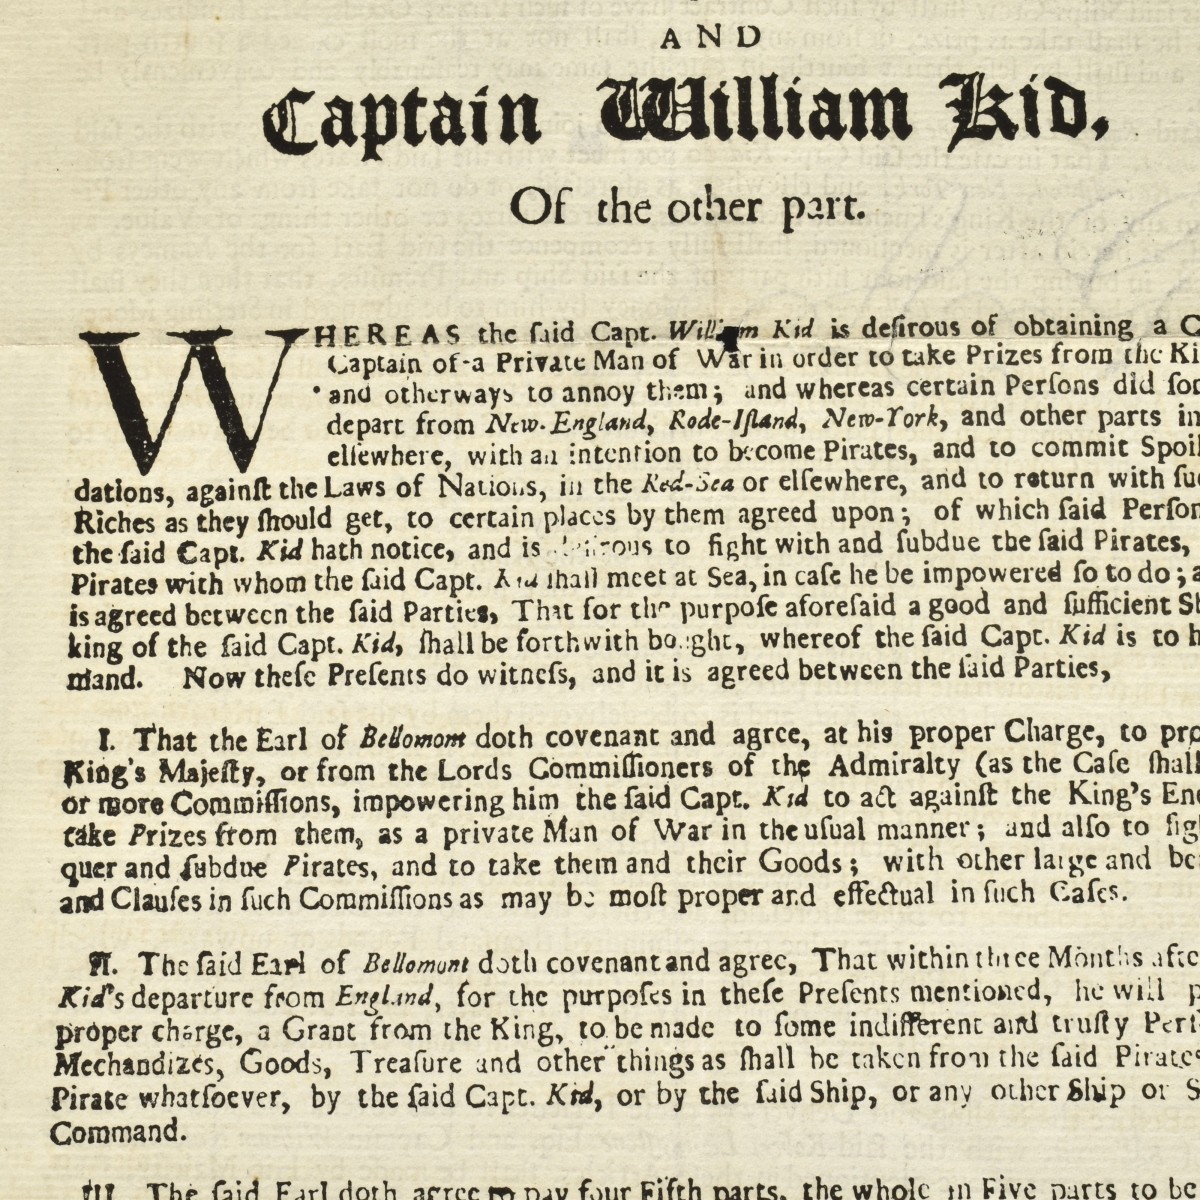 Articles of Agreement, Captain William Kidd